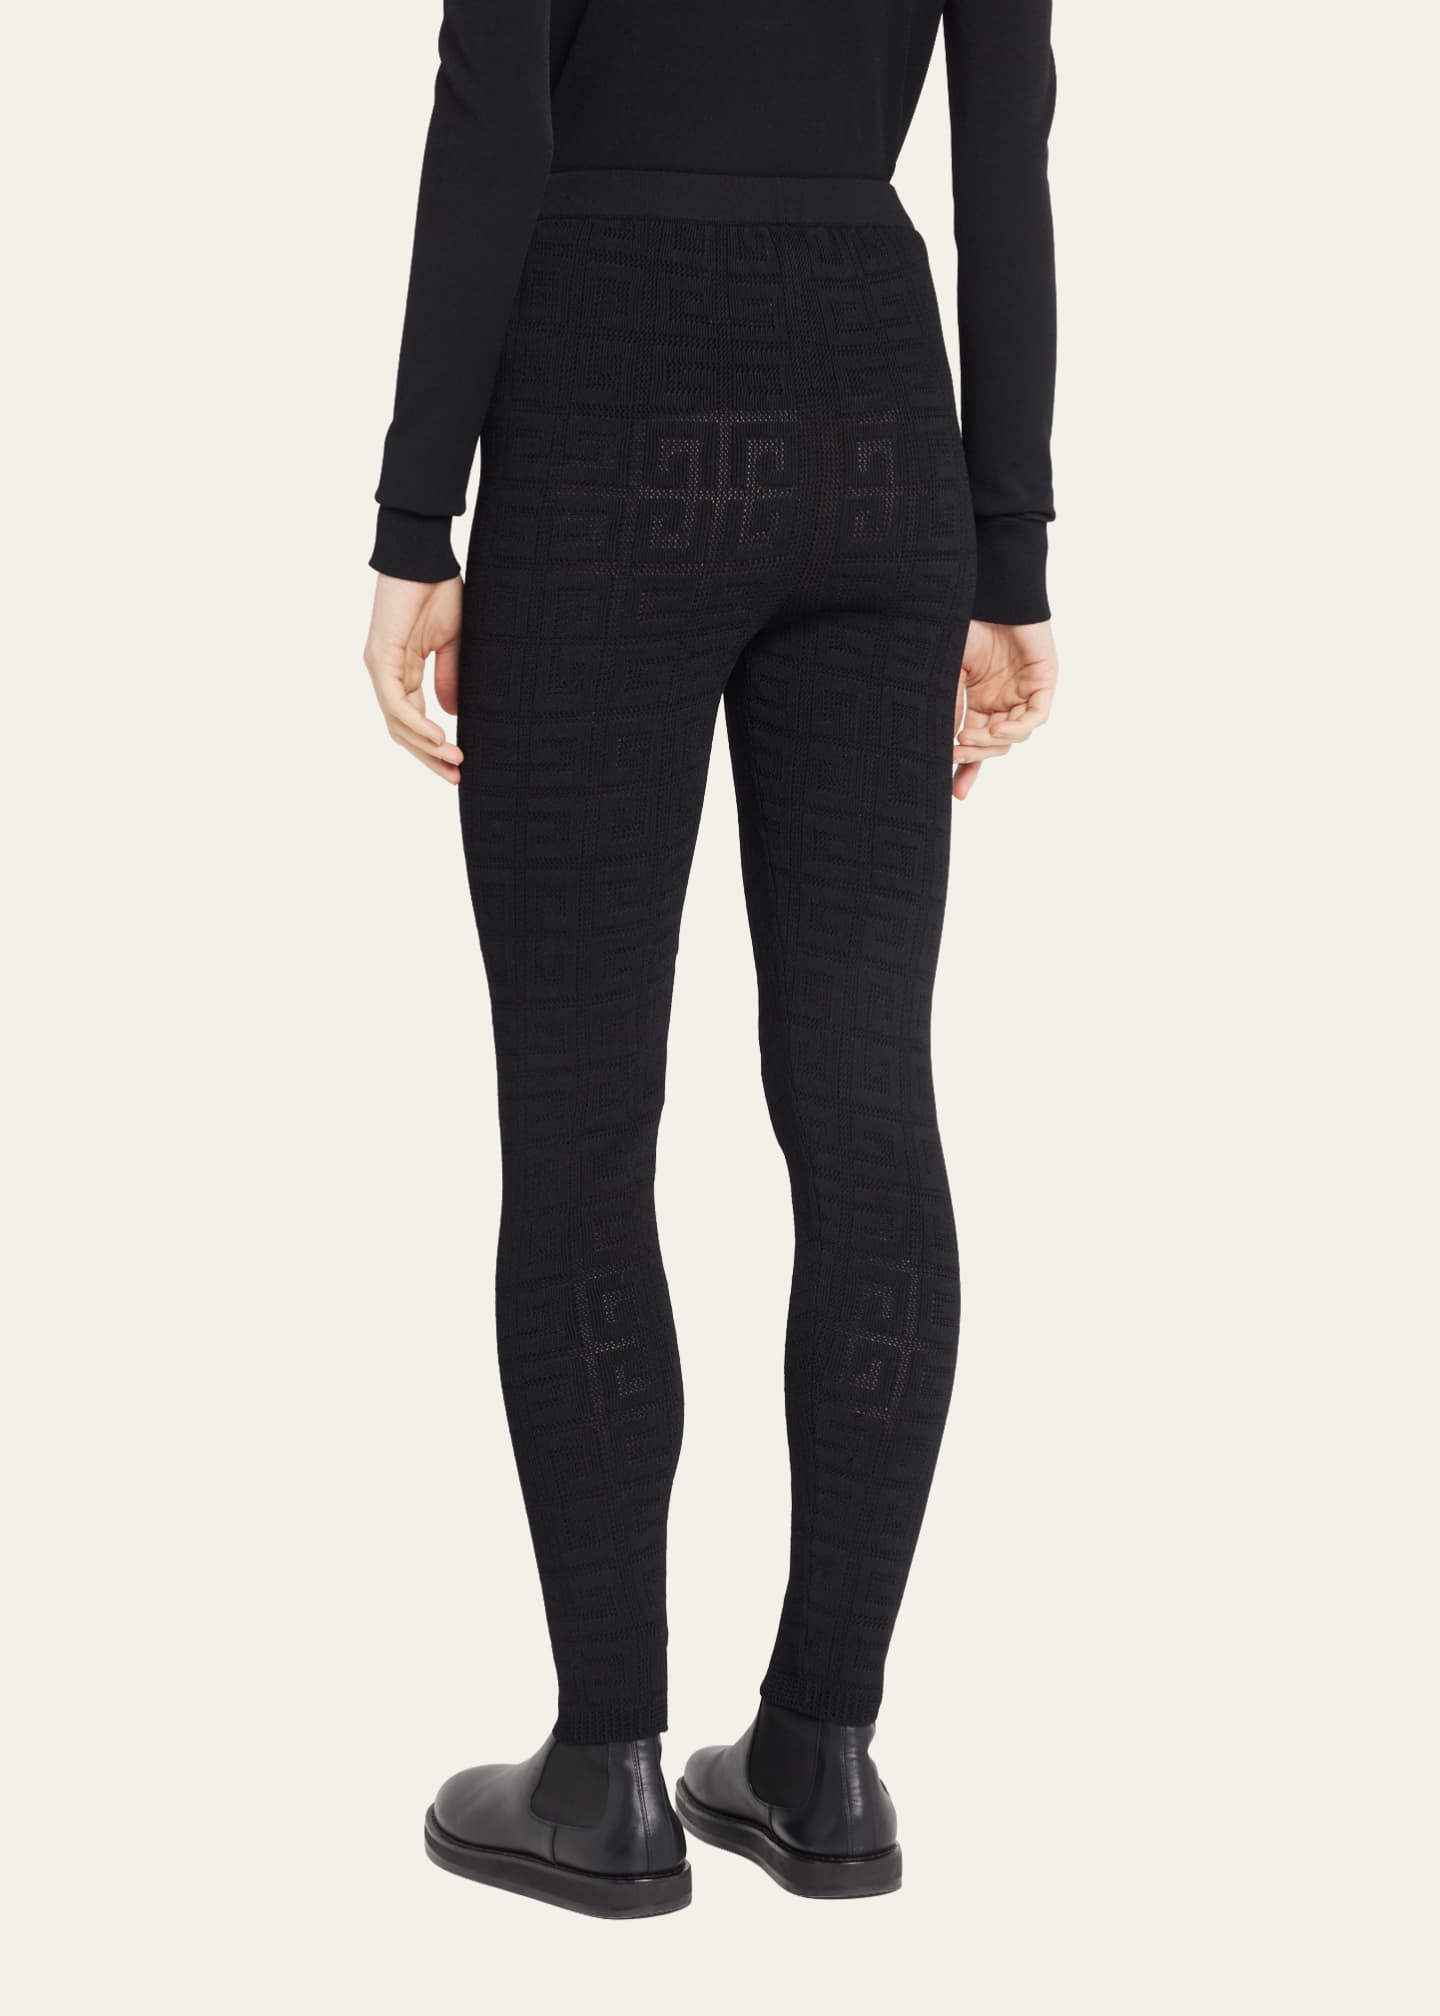 Givenchy Black Knit Quilted Paneled Zip Detail Leggings L Givenchy